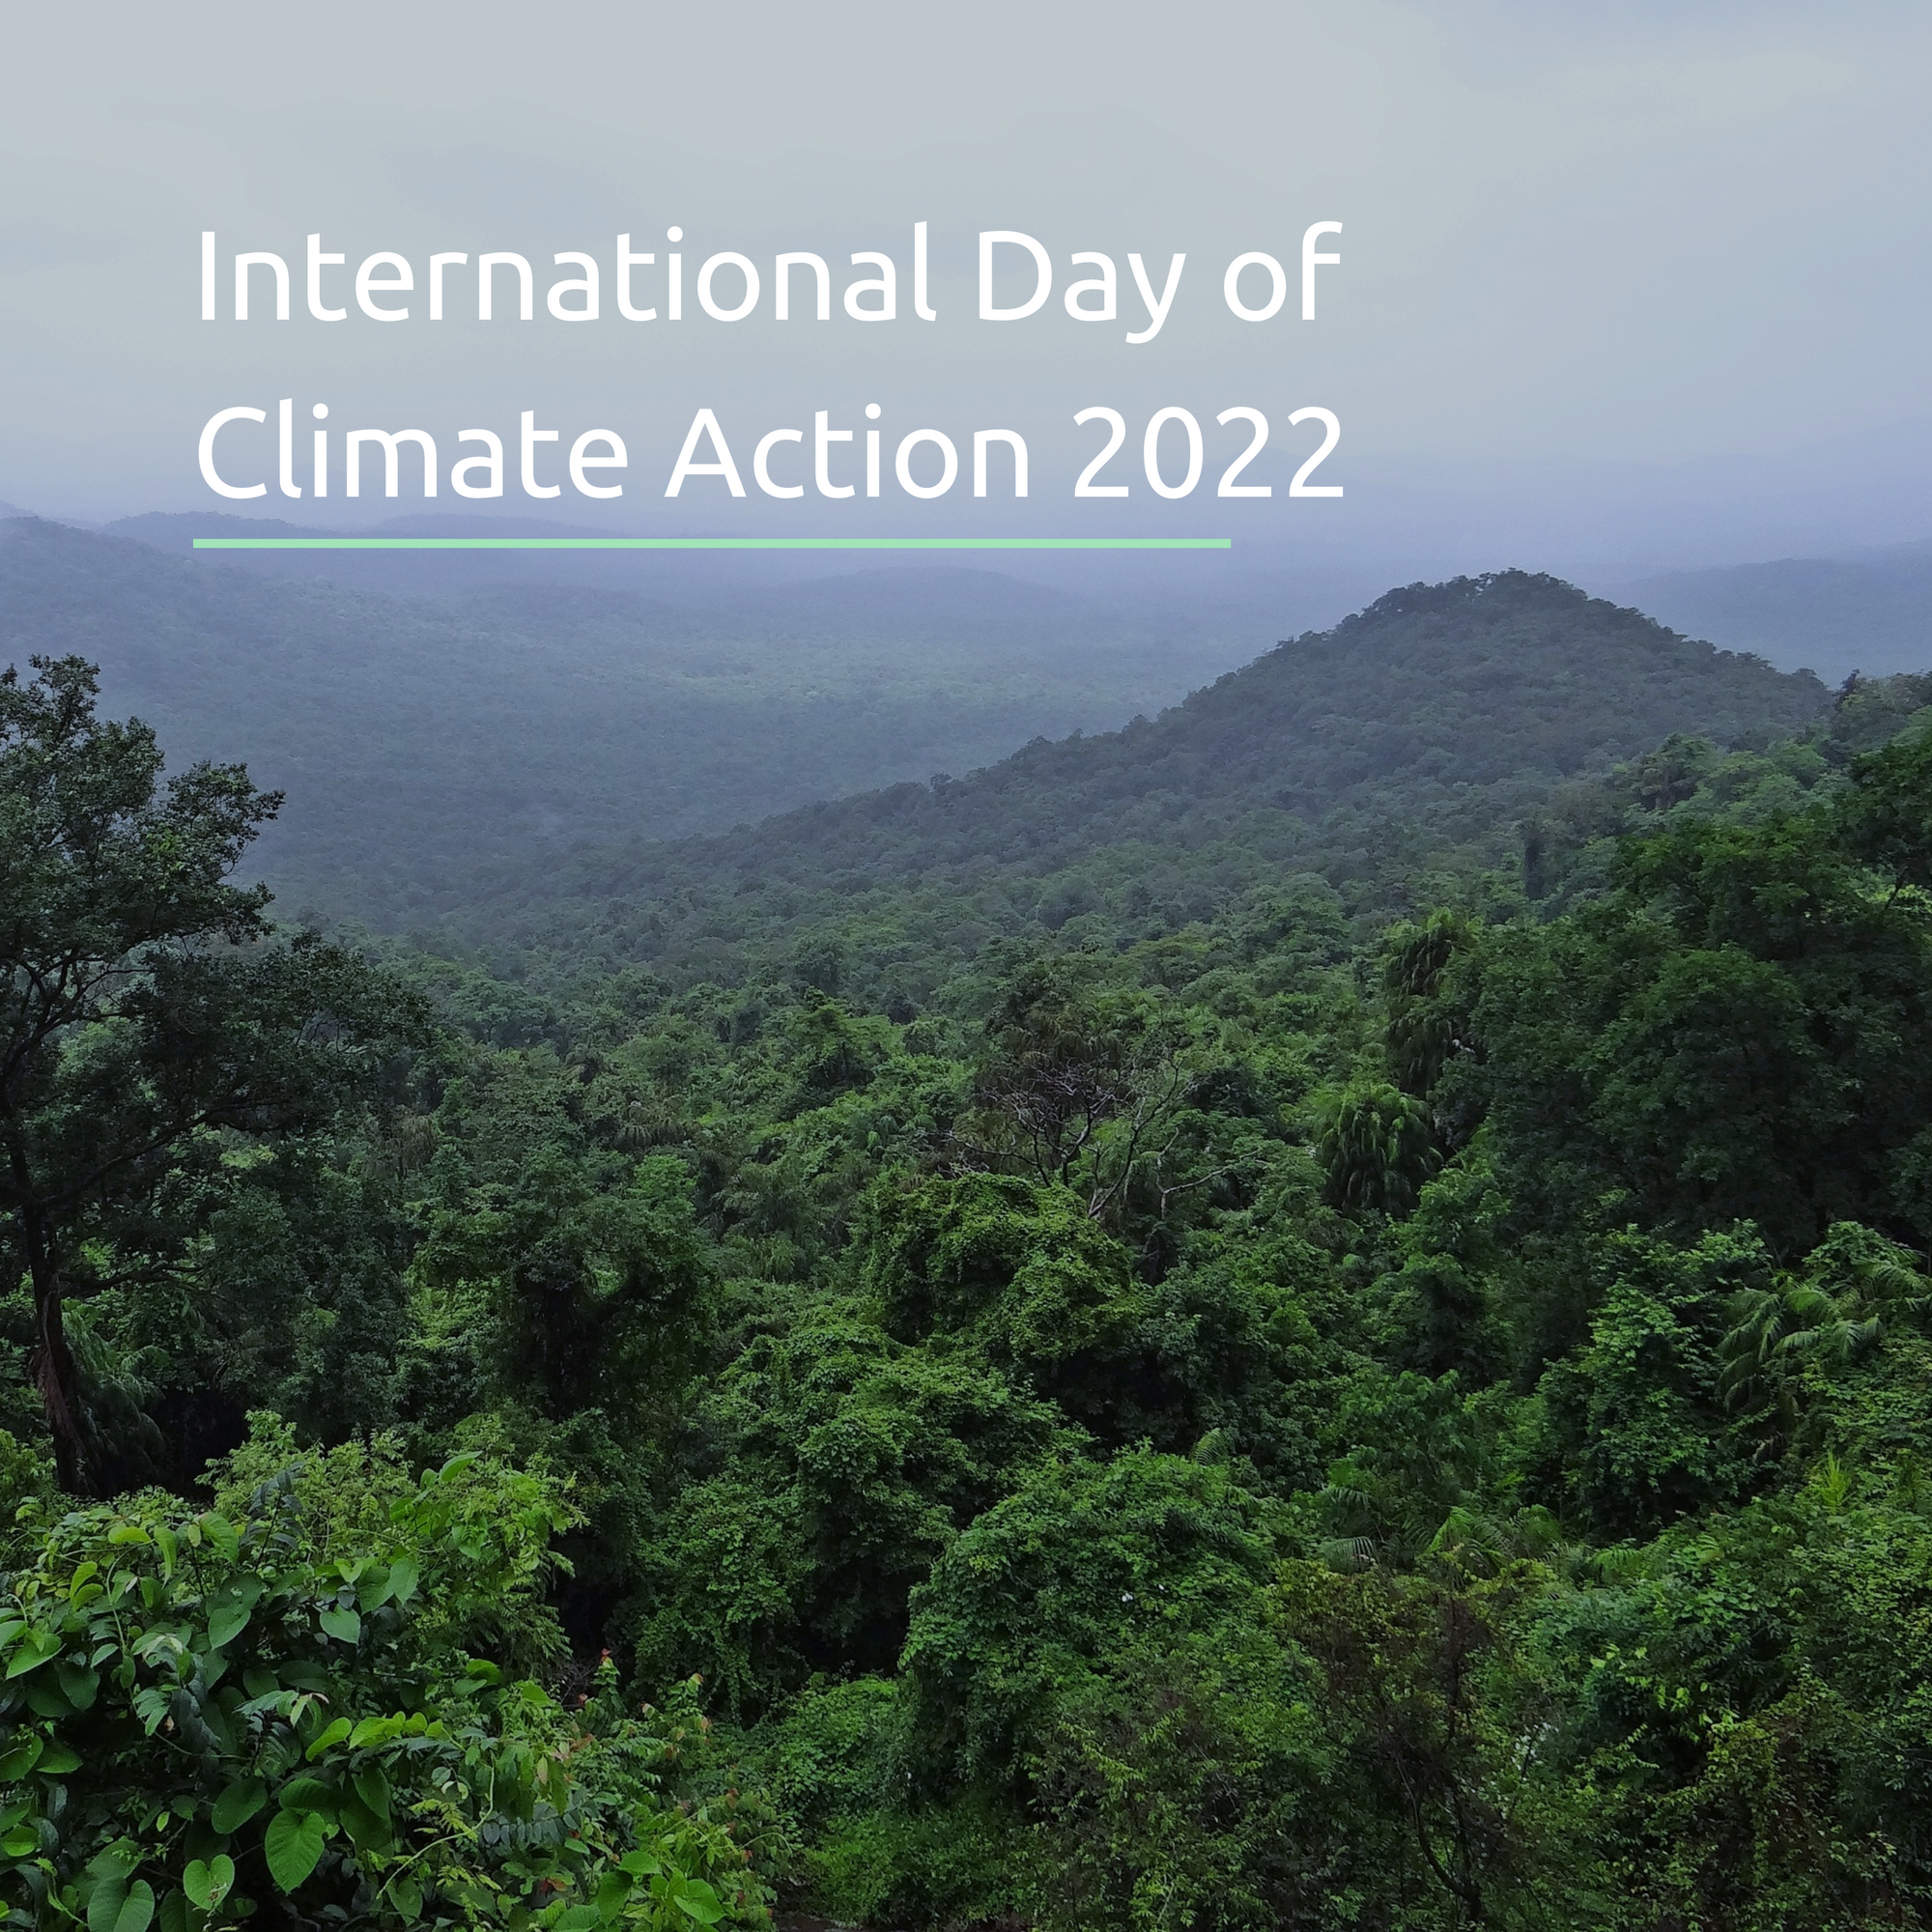 International Day of Climate Action 2022